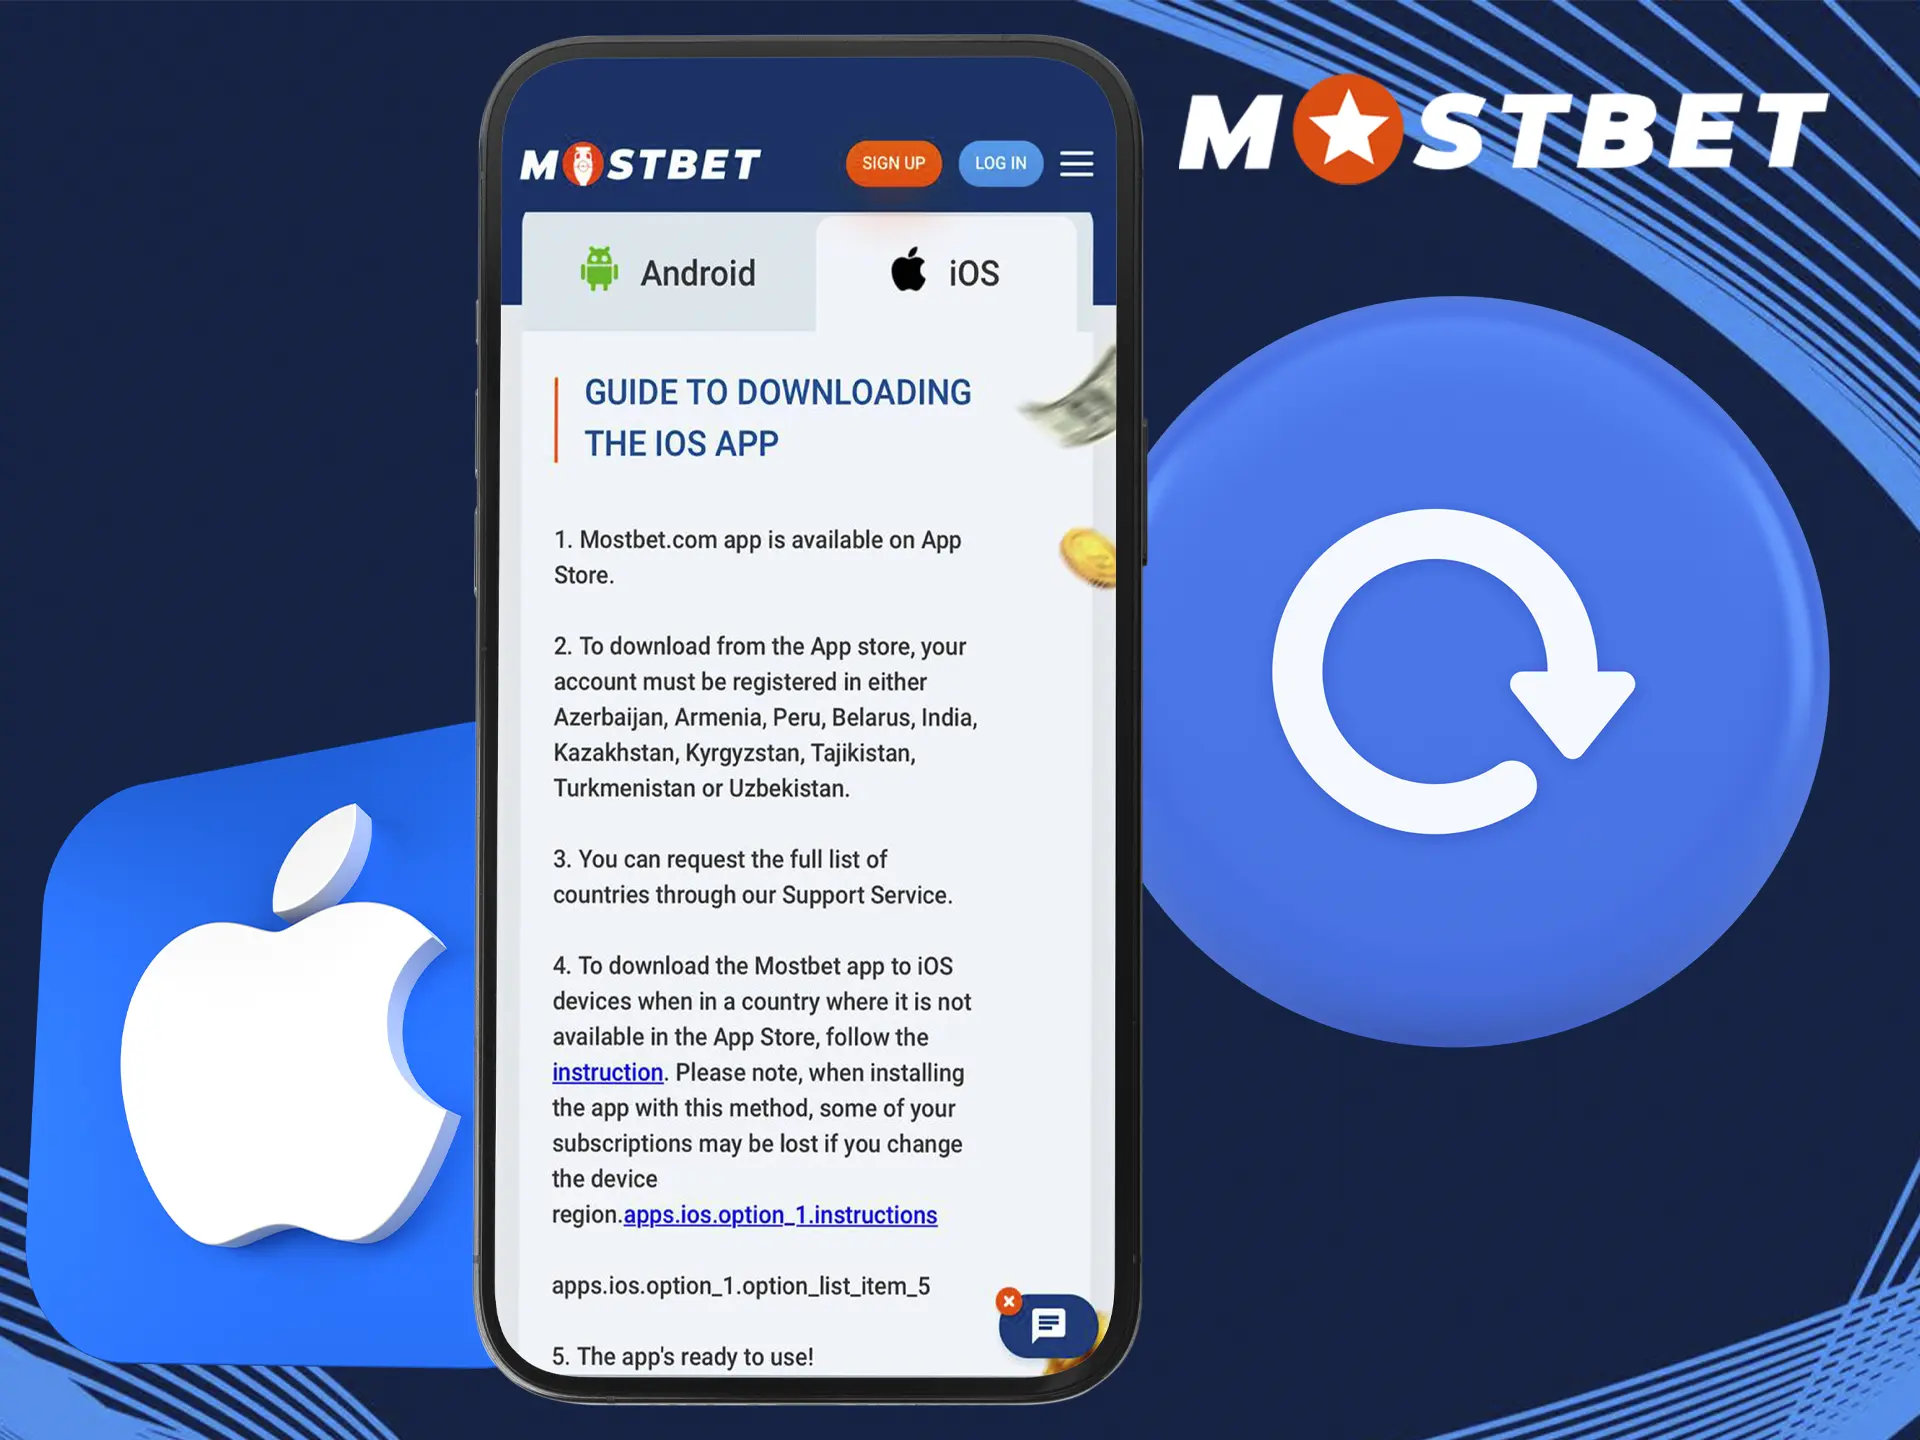 Use the current version of the app to instantly receive new bonuses from Mostbet Casino.